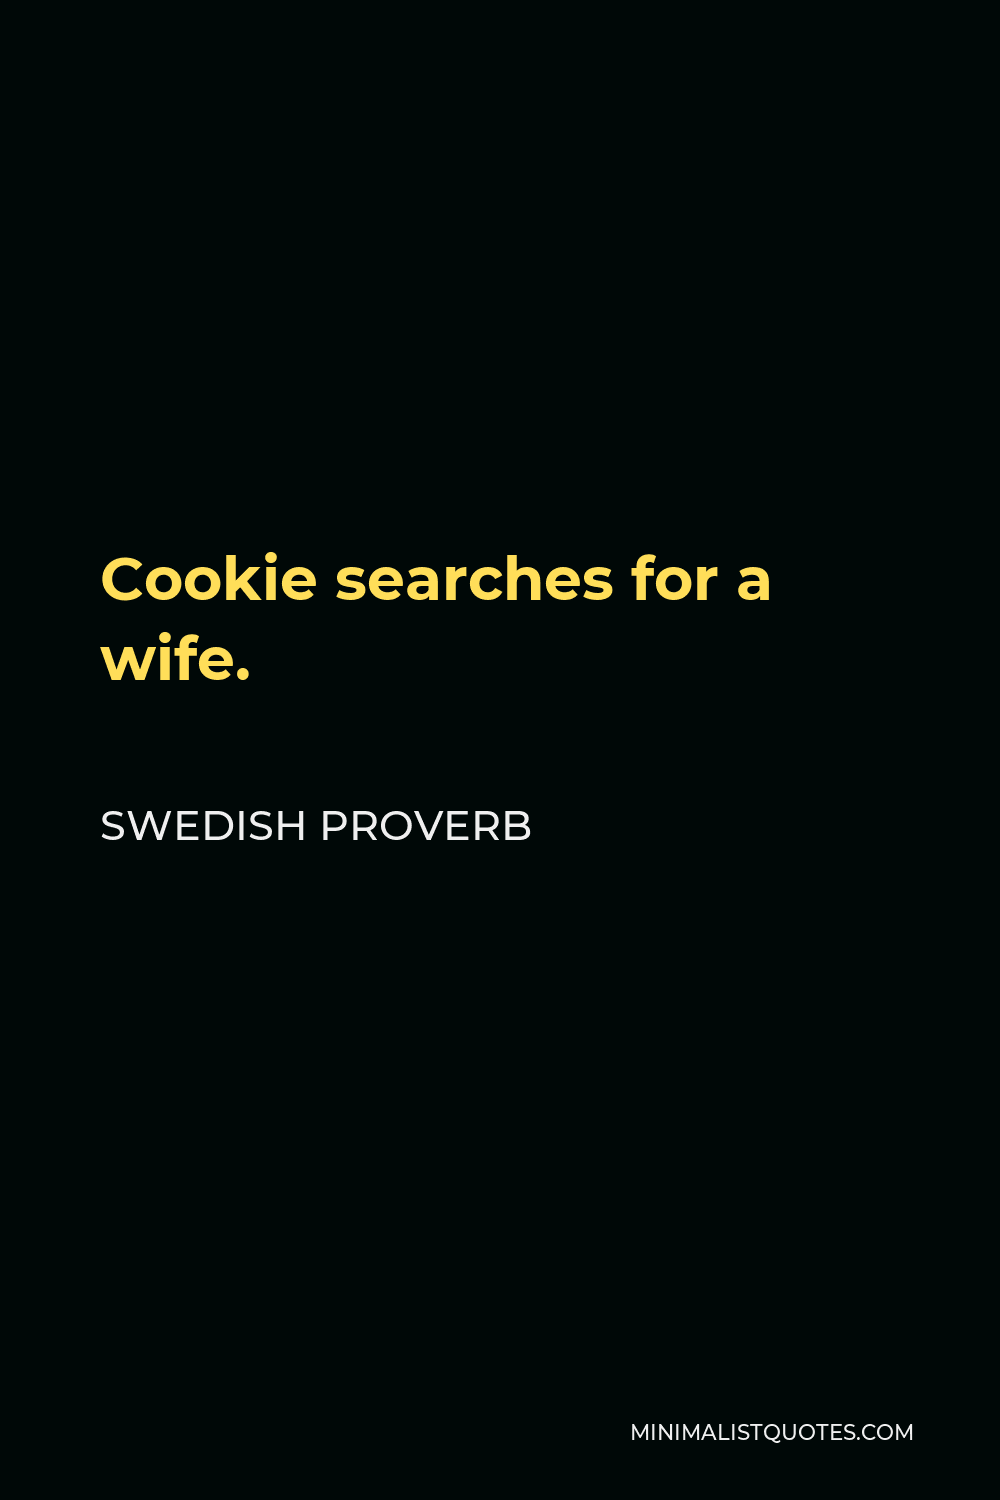 Swedish Proverb Quote - Cookie searches for a wife.